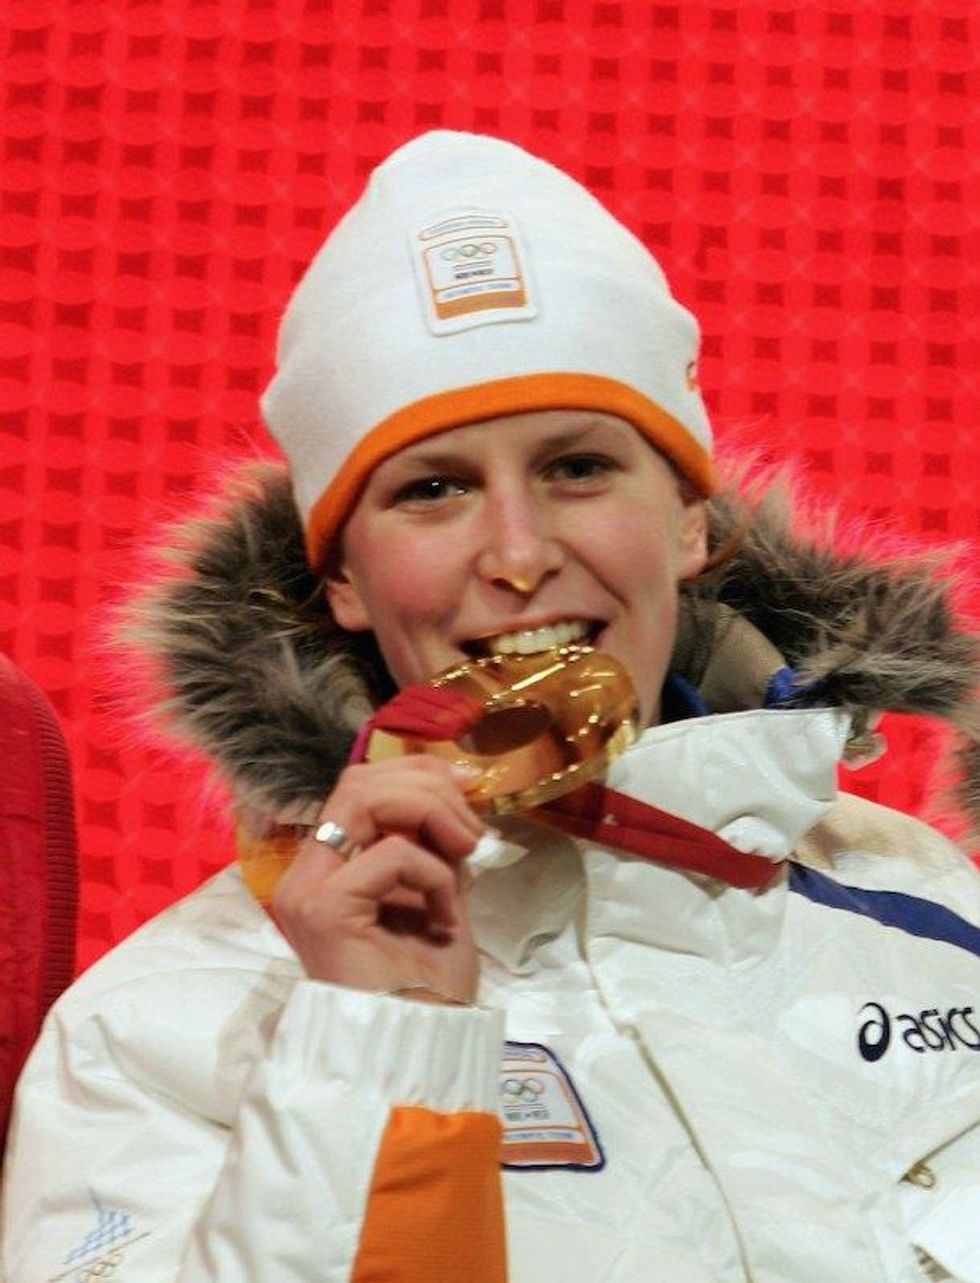 Ireen Wurst Wins Gold at 2006 Winter Olympics in Turin